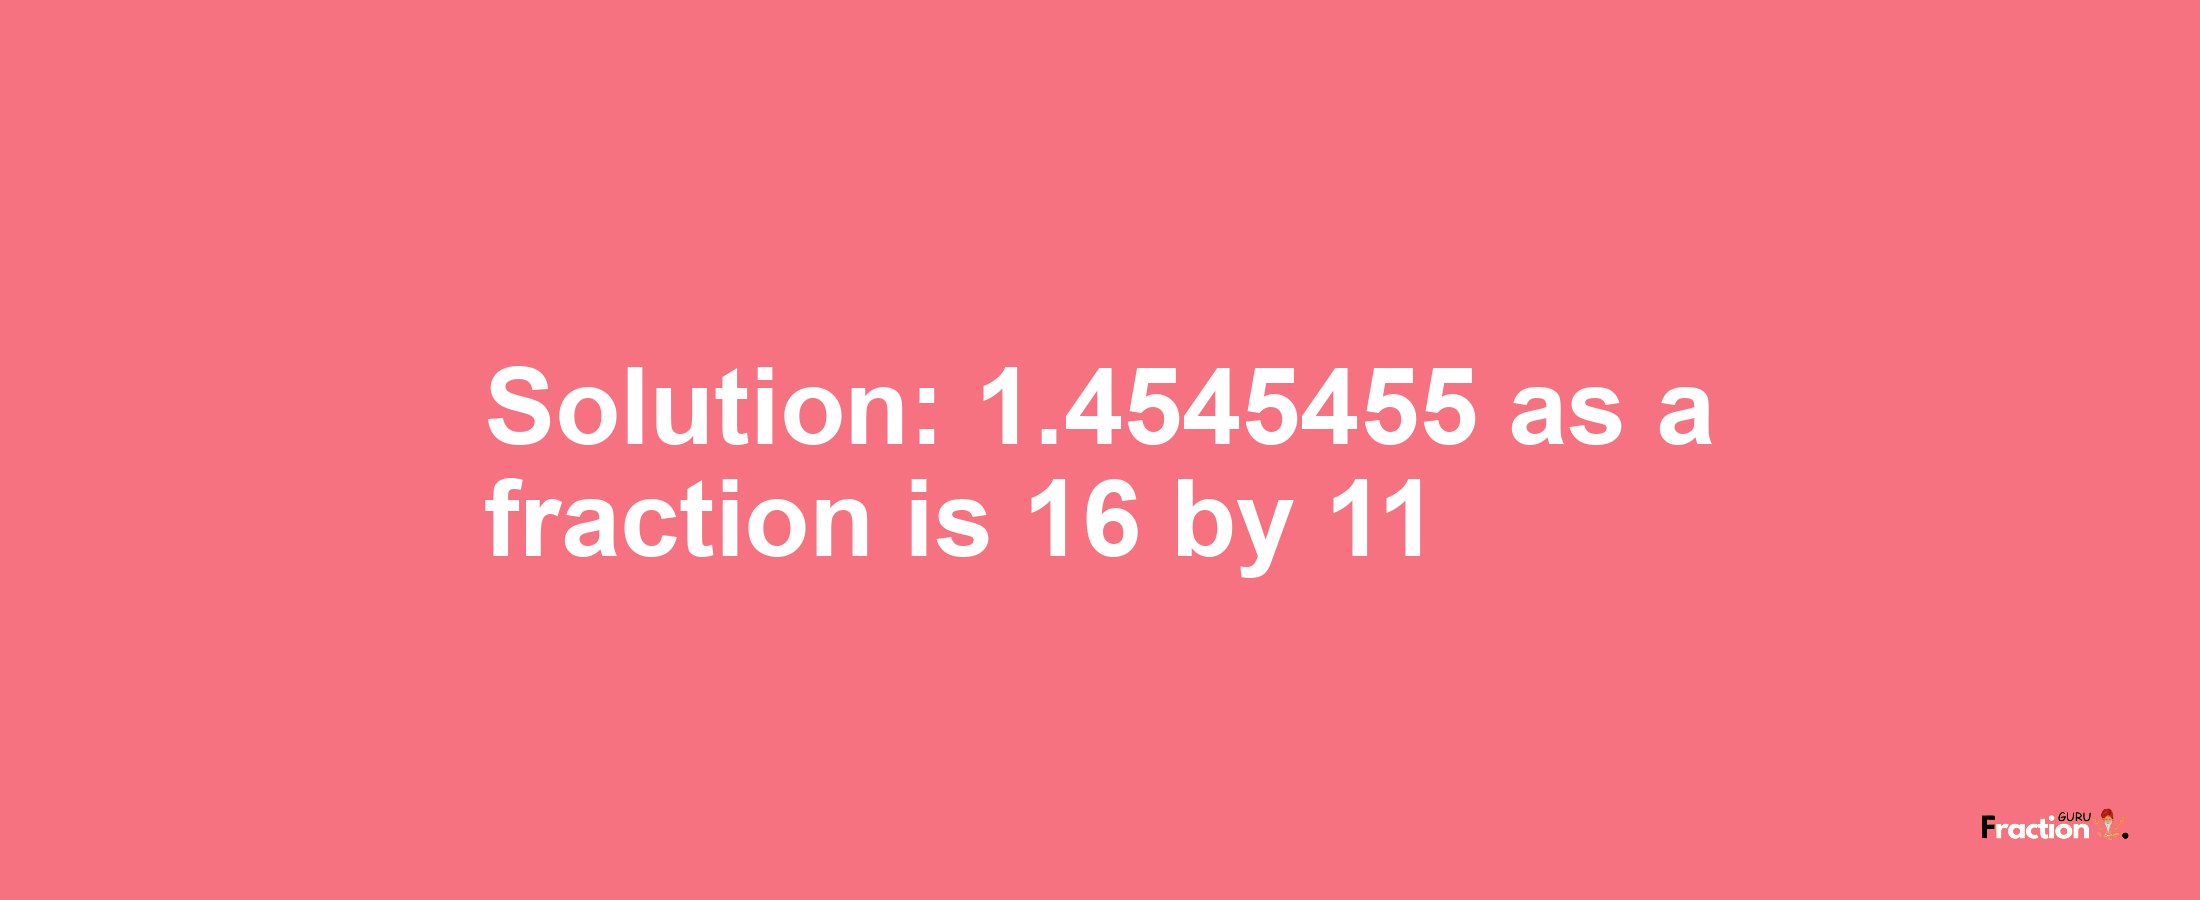 Solution:1.4545455 as a fraction is 16/11